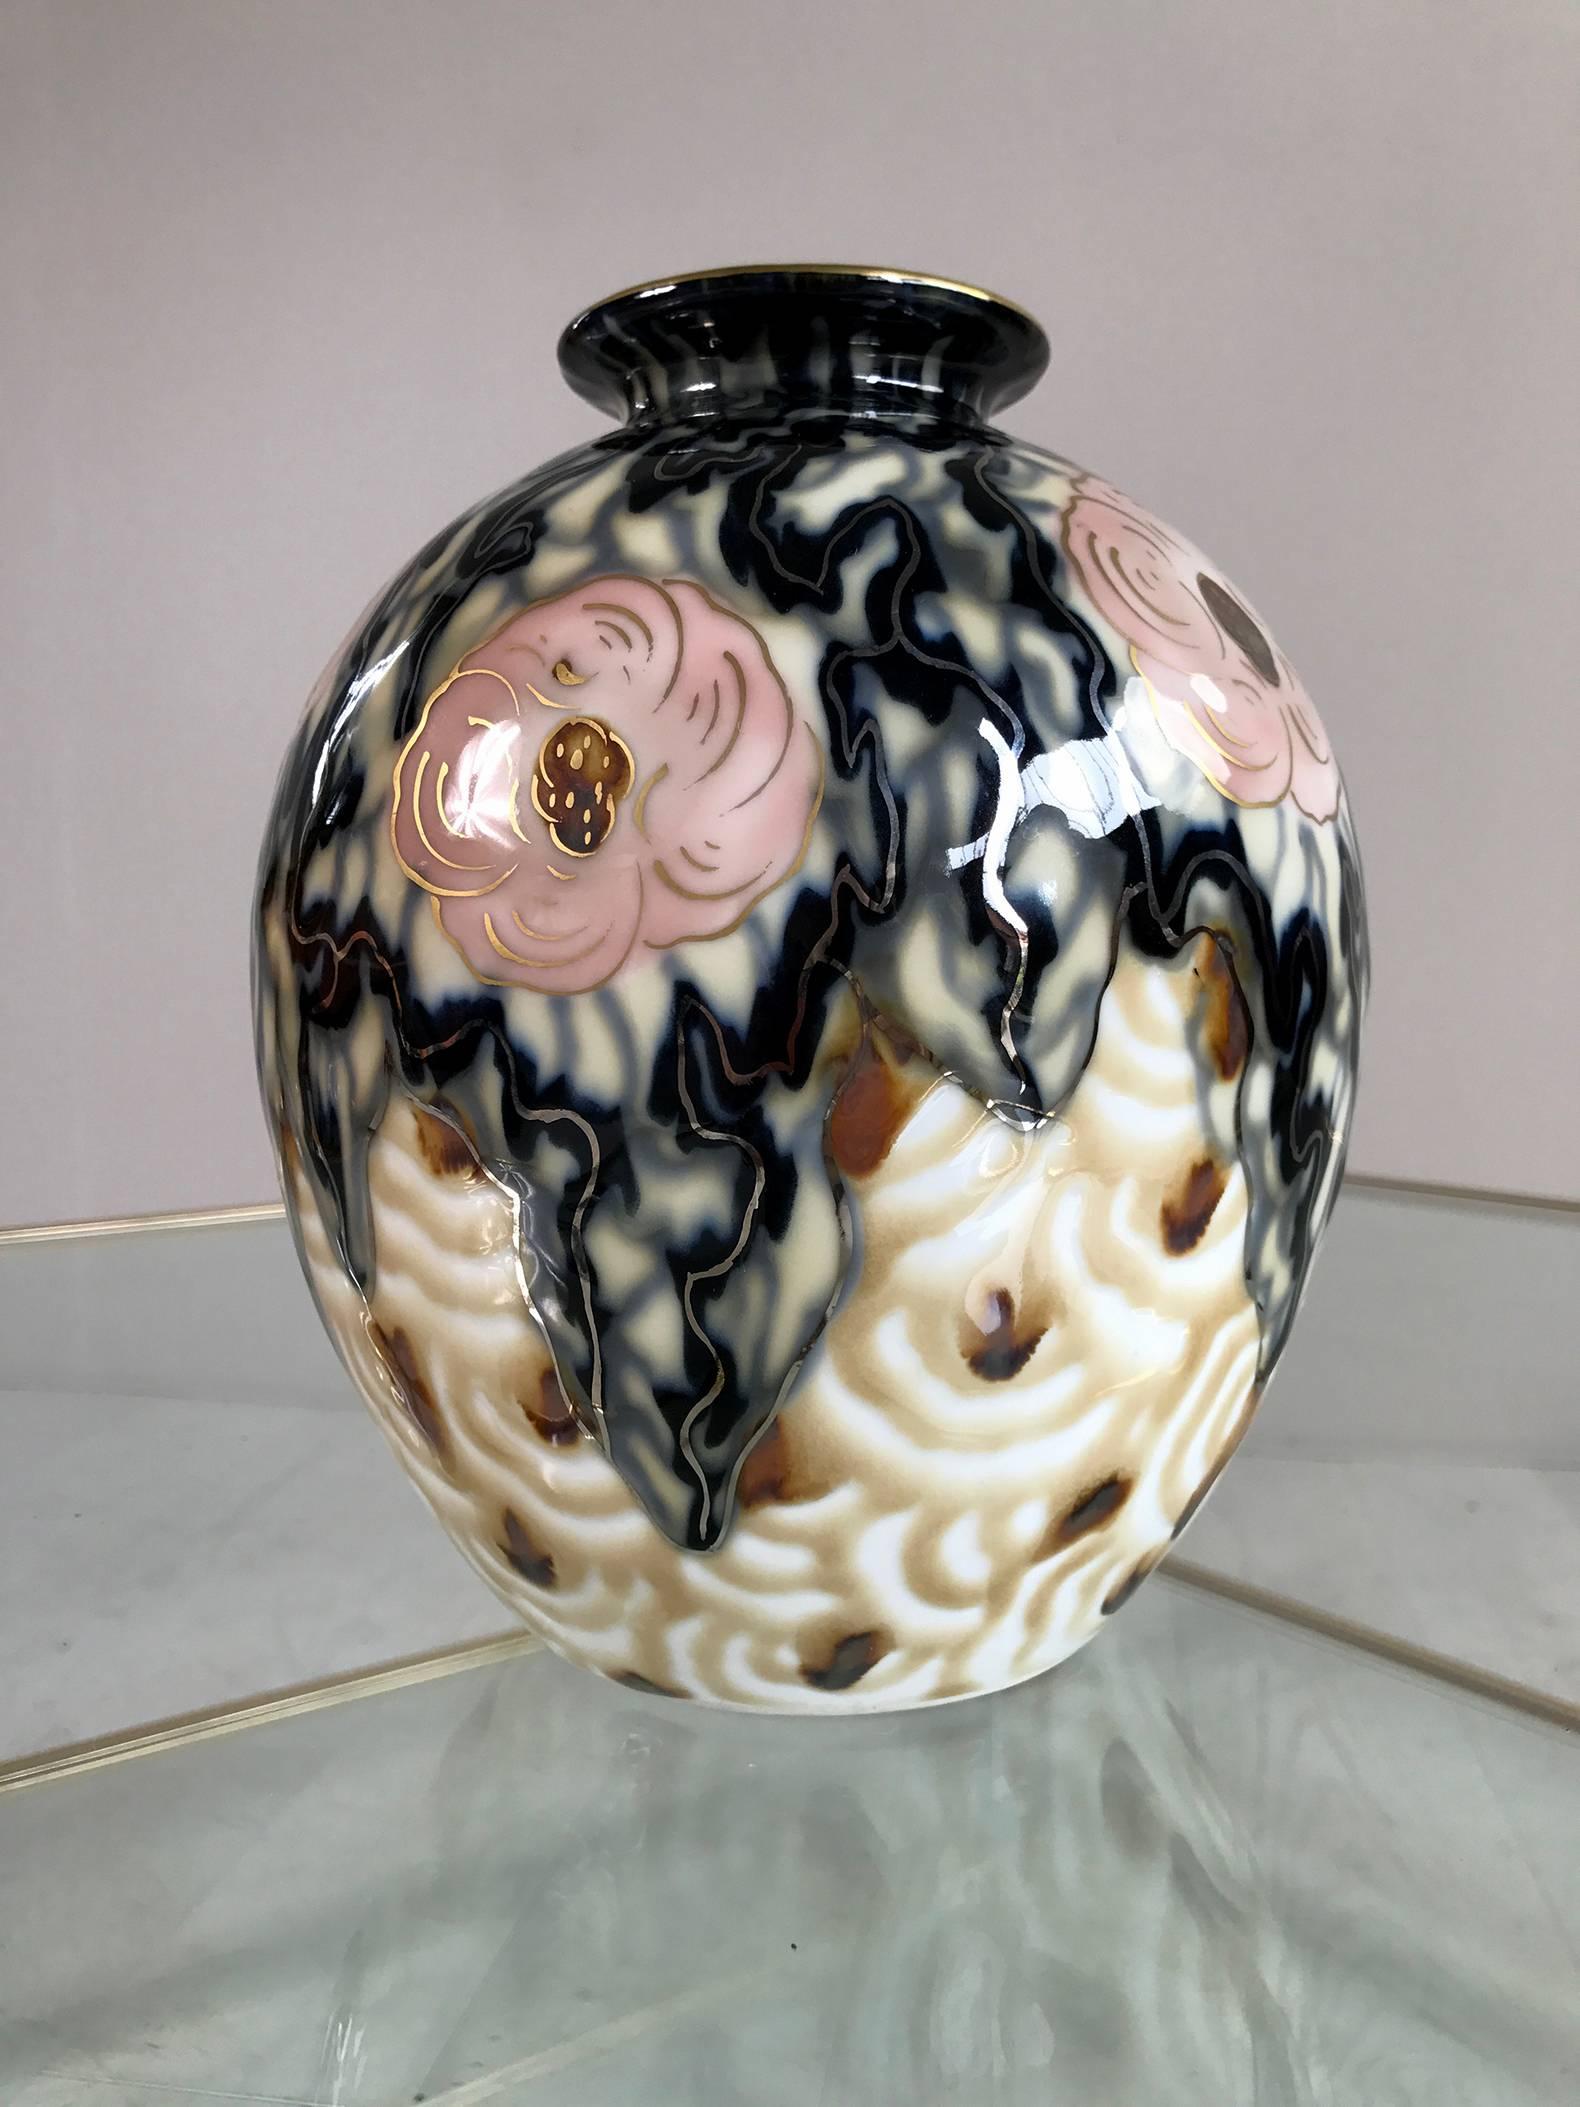 Beautiful Limoges porcelain vase signed Camille Tharaud, France 1930.
Enamelled grand feu with pink flowers decoration on black and white background, enhanced with gold.
Stamp, signature under the base and store label (Toulouse), perfect